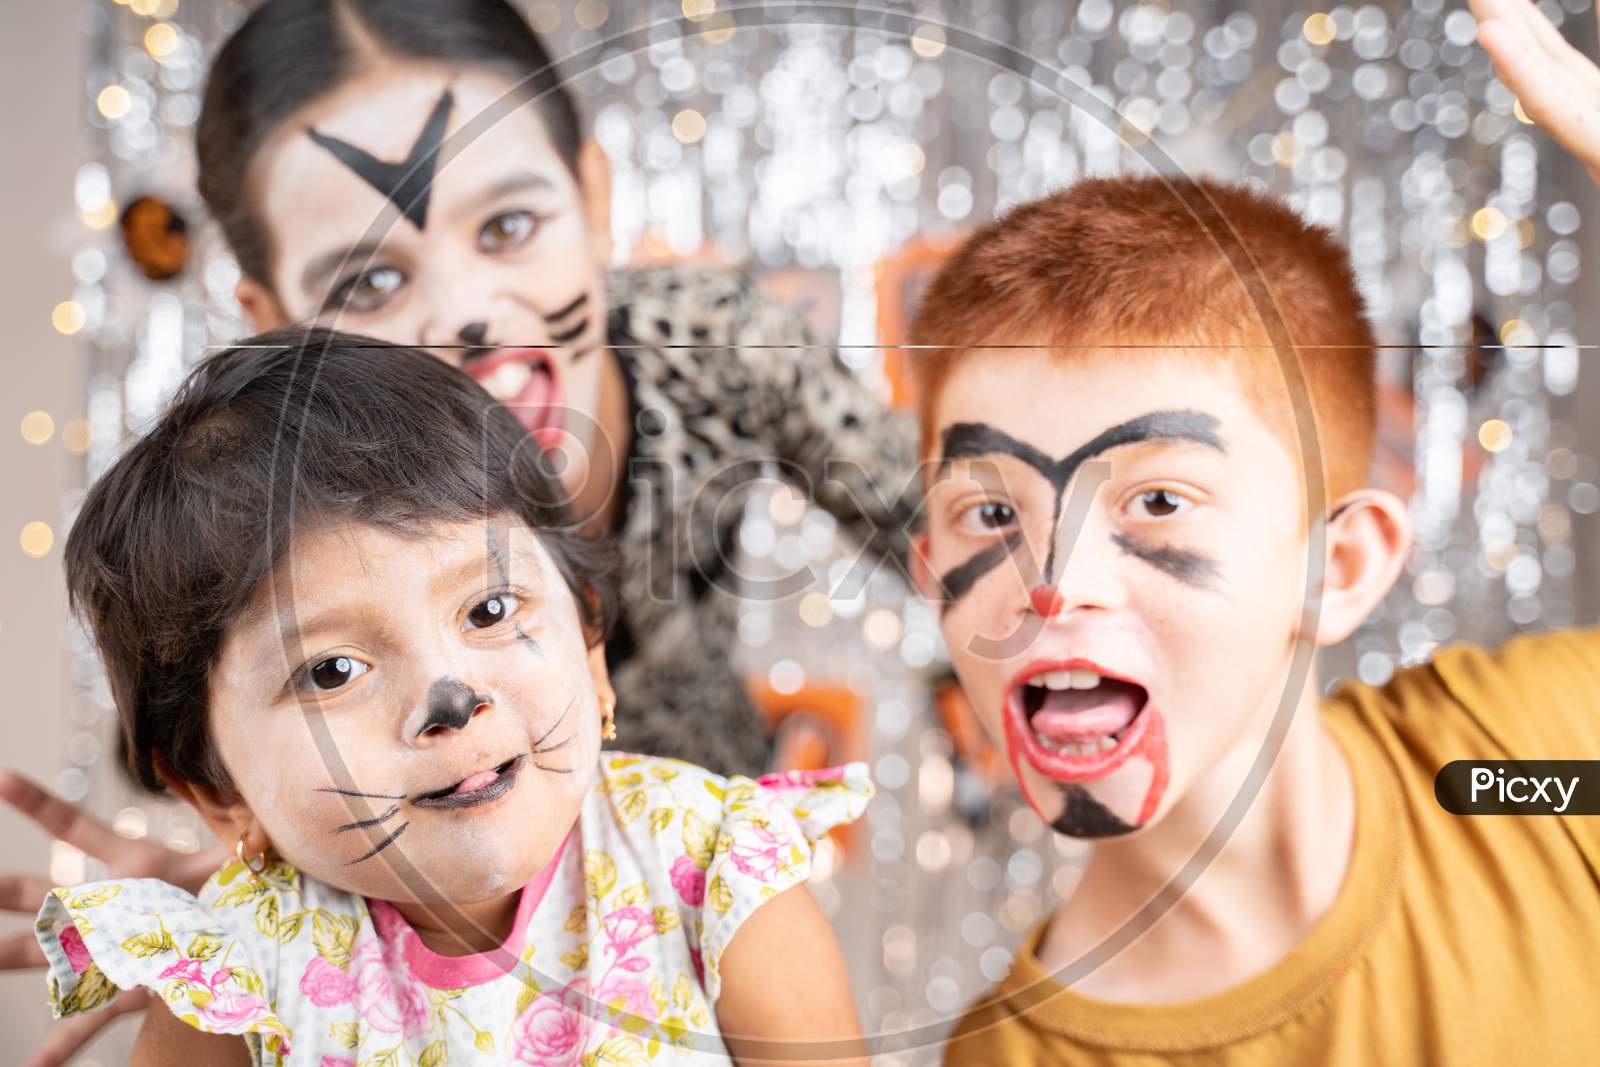 Group Of Kids In Halloween Costumes Gesticulating And Making Scary Or Spooky Faces On Decorated Background By Looking Into Camera.